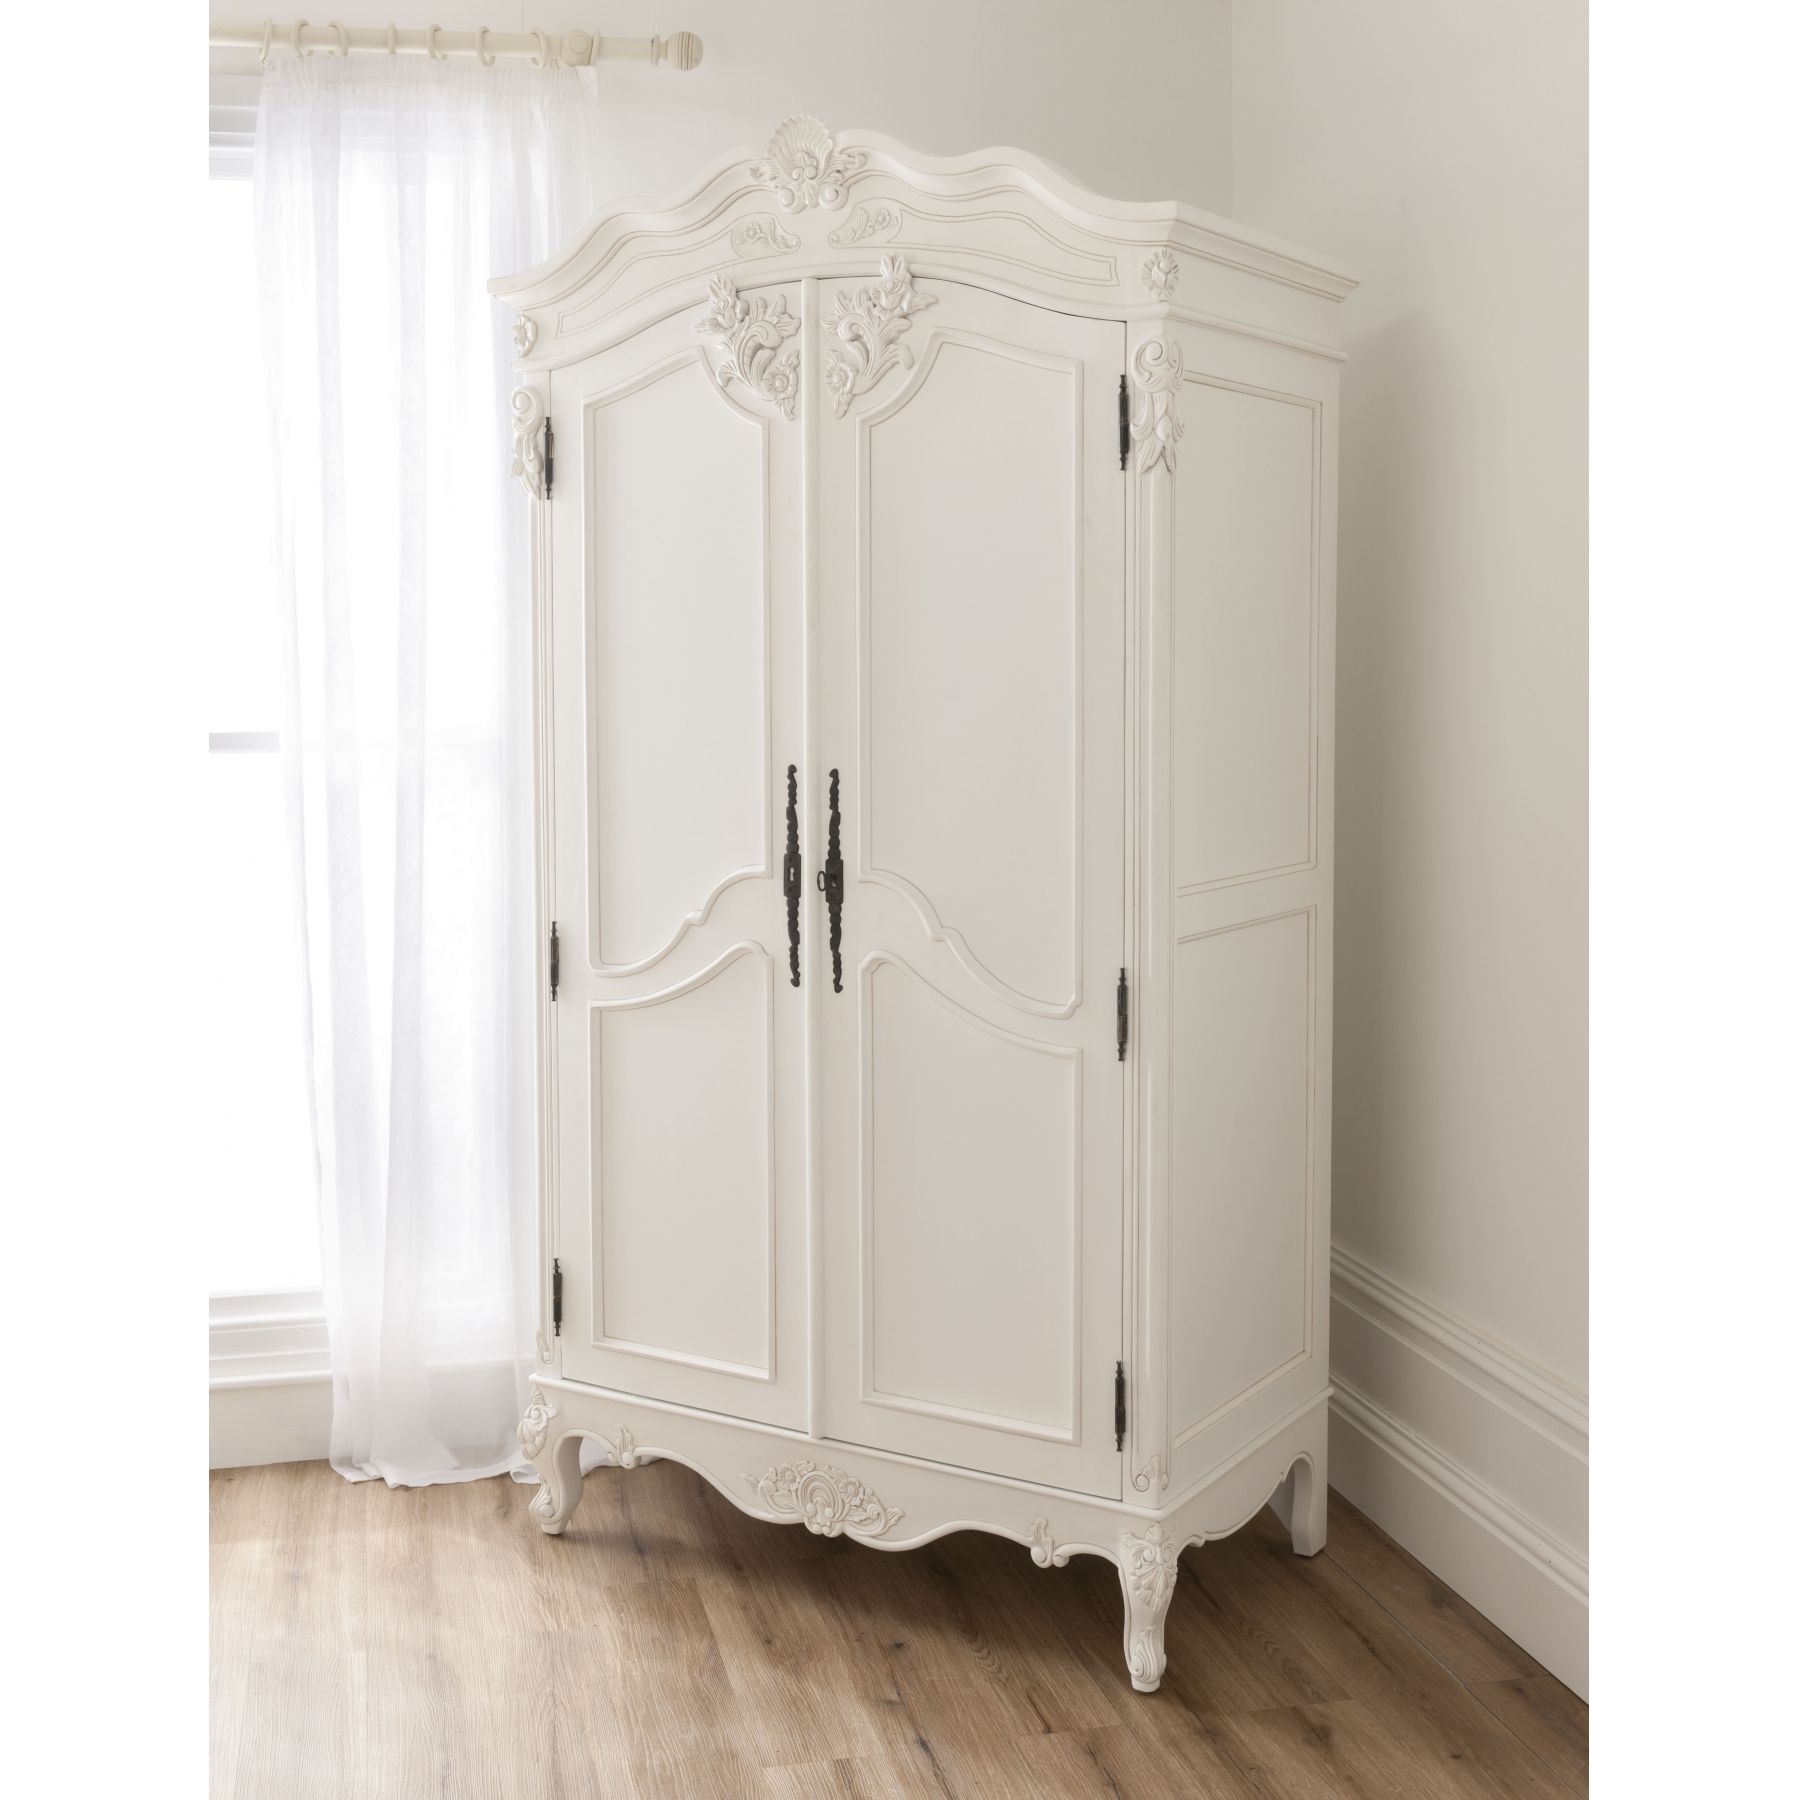 white wardrobes get bold - select a white wardrobe for your room NGYIXWK